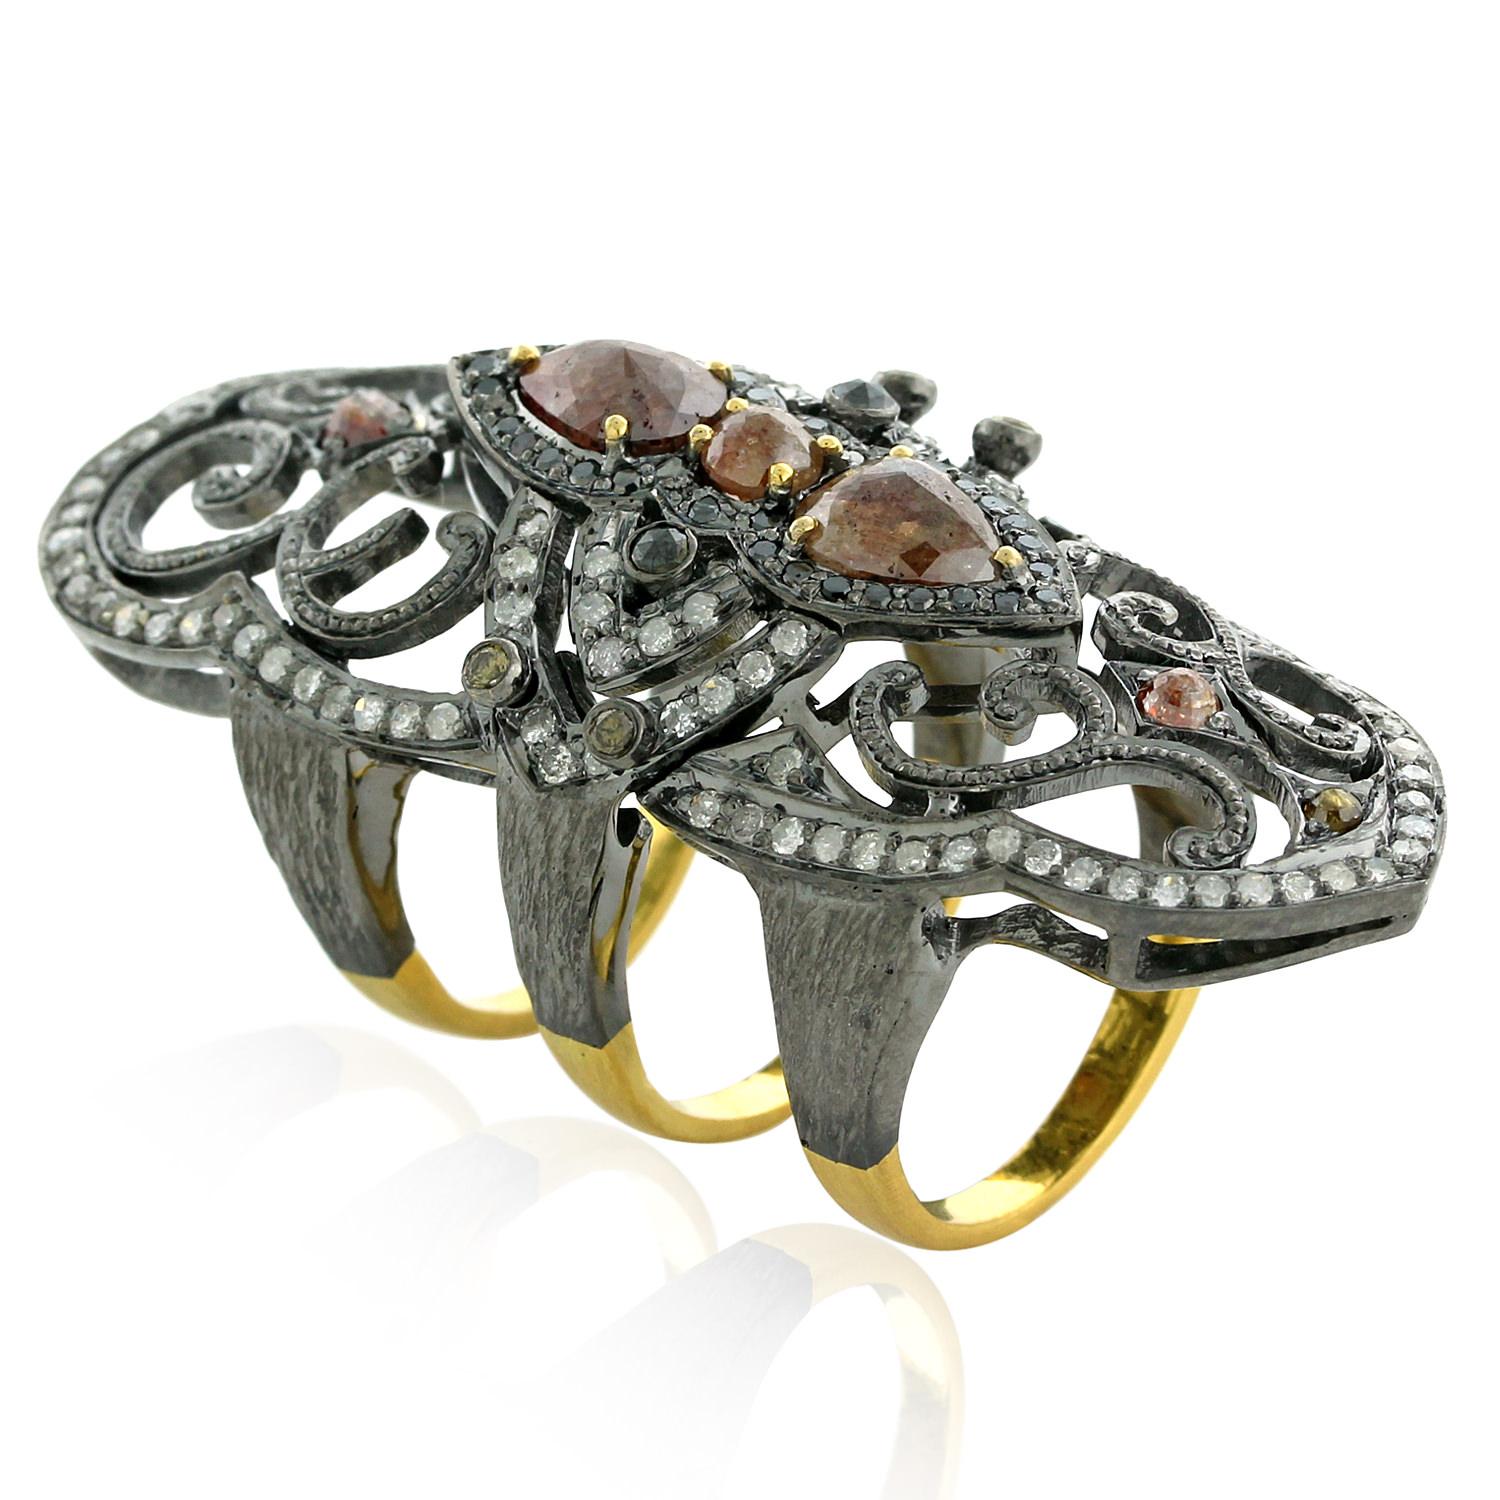 Artisan Ice Diamond Knuckle Ring with Filigree Work & Pave Diamonds in 18k Gold & Silver For Sale